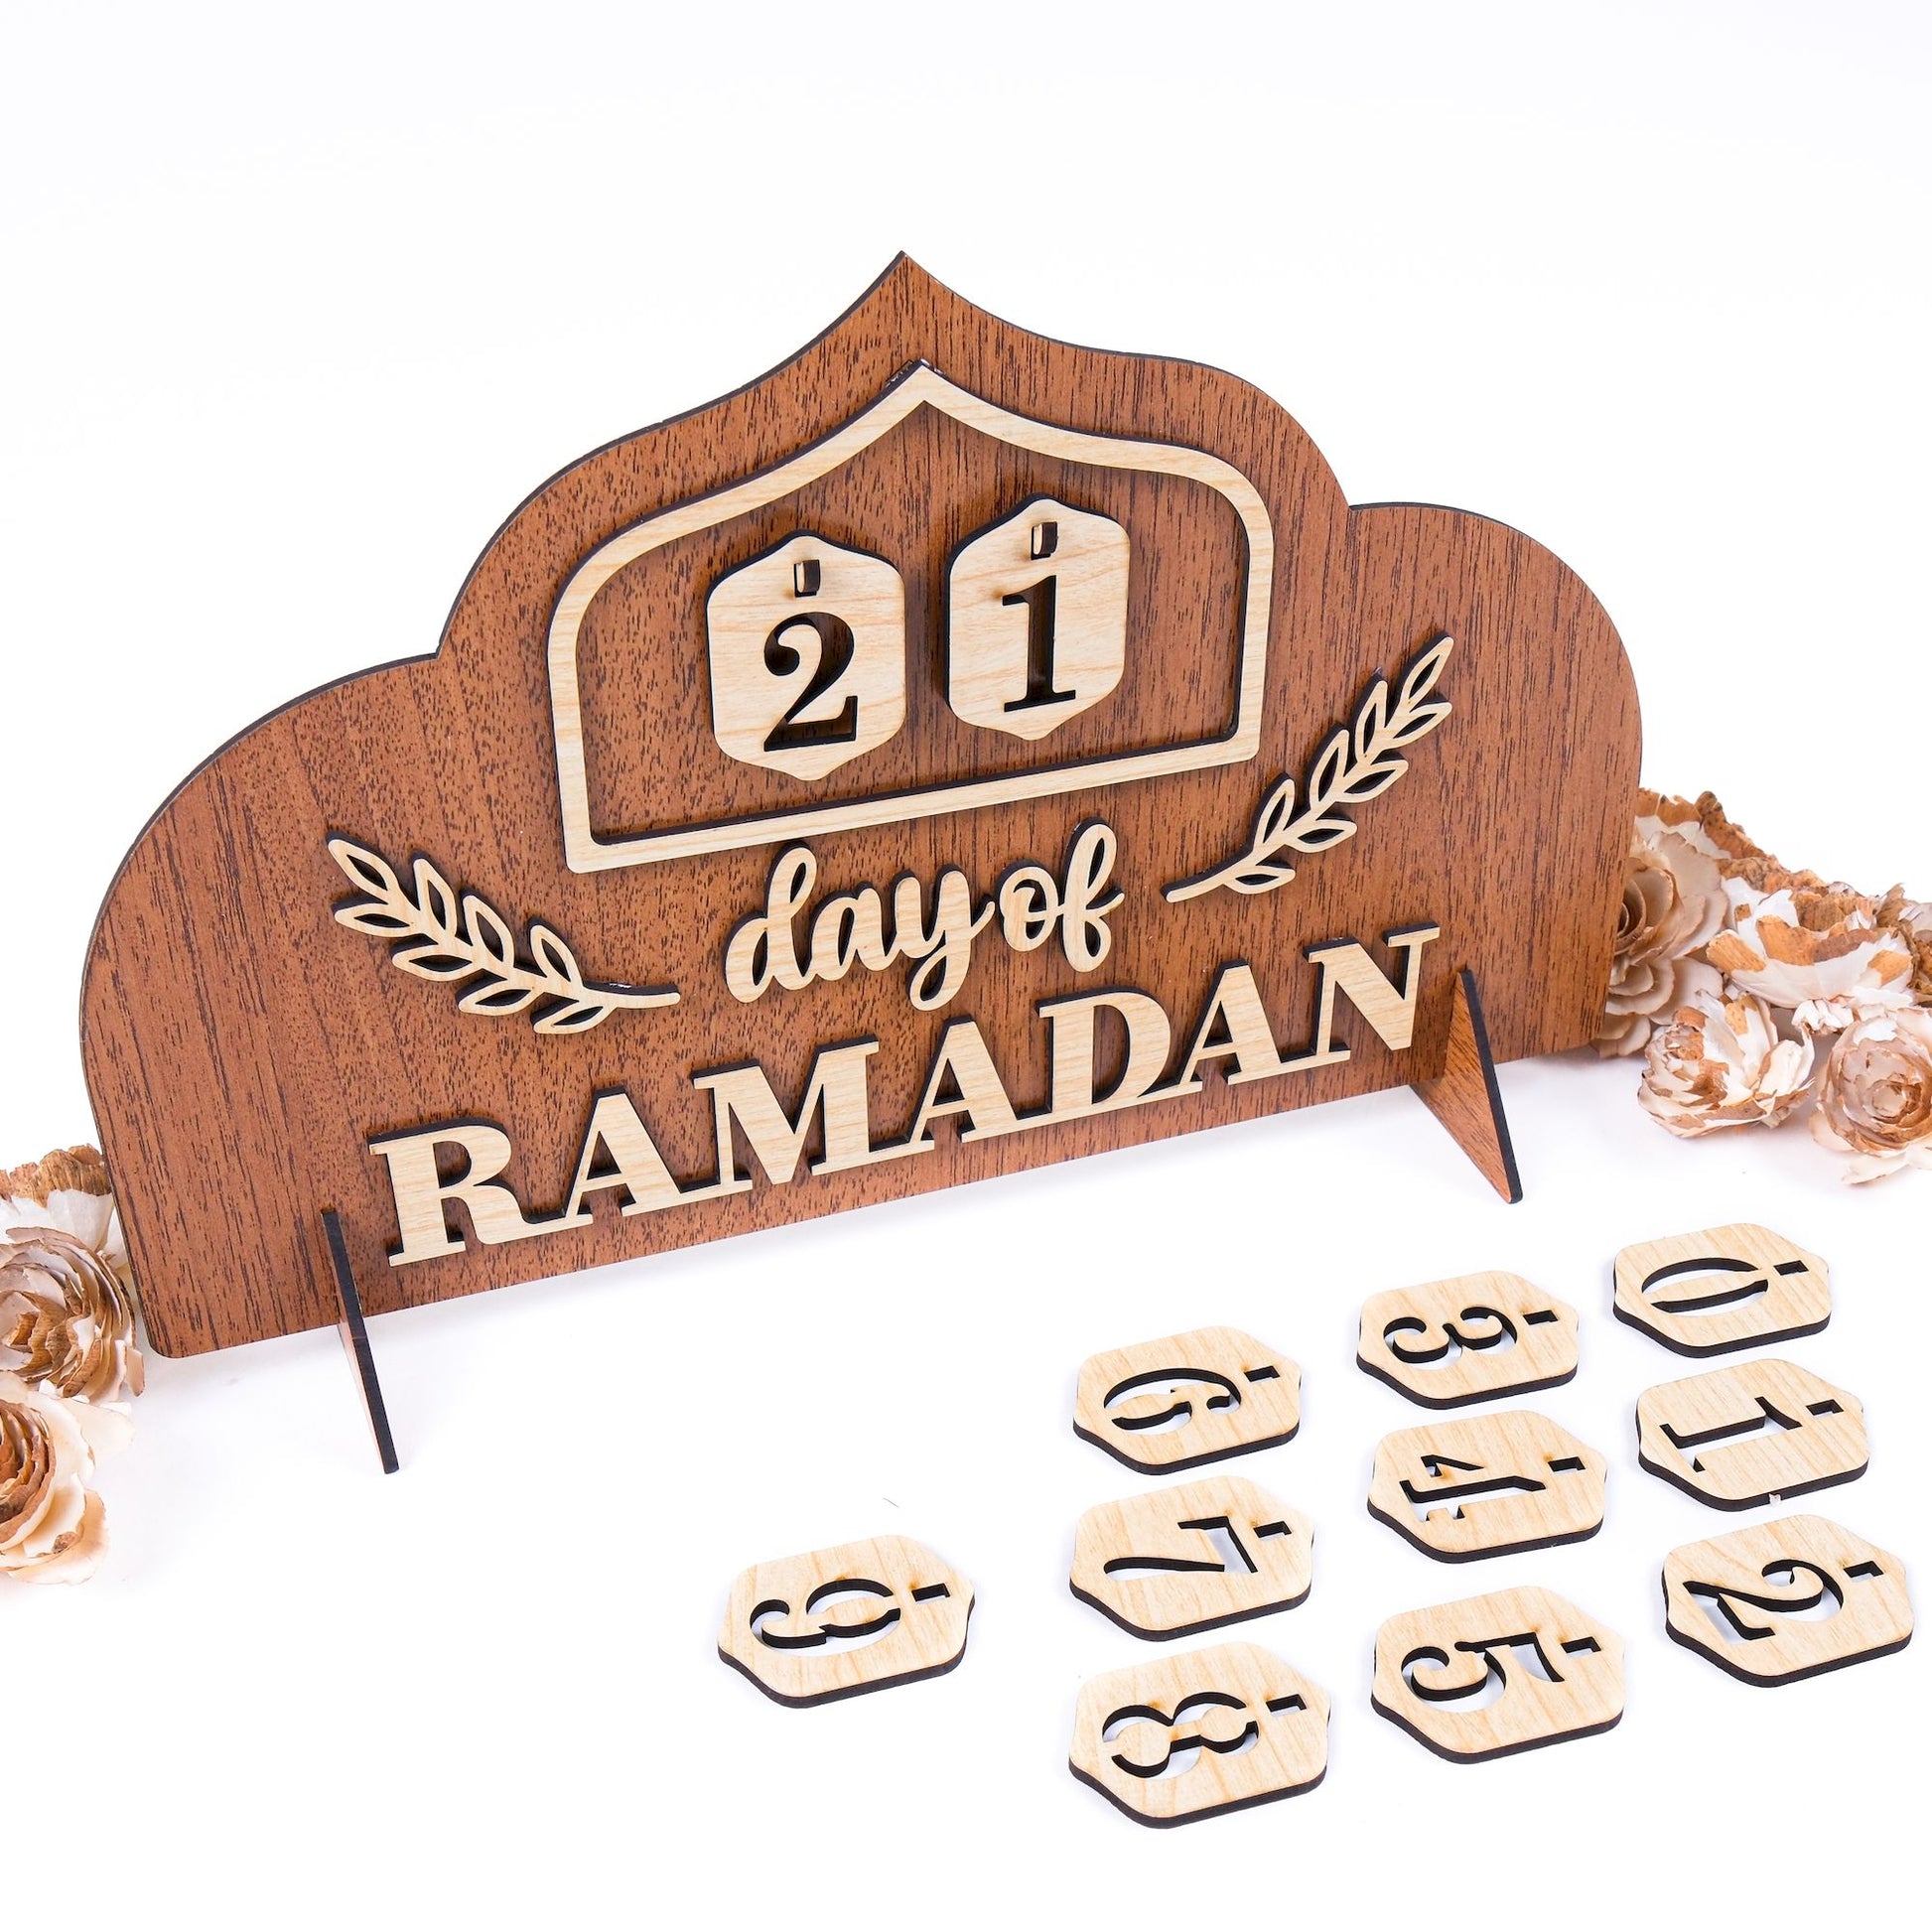 Ramadan Eid Advent Countdown Calendar Islamic Home Table Decor Gift - Islamic Elite Favors is a handmade gift shop offering a wide variety of unique and personalized gifts for all occasions. Whether you're looking for the perfect Ramadan, Eid, Hajj, wedding gift or something special for a birthday, baby shower or anniversary, we have something for everyone. High quality, made with love.